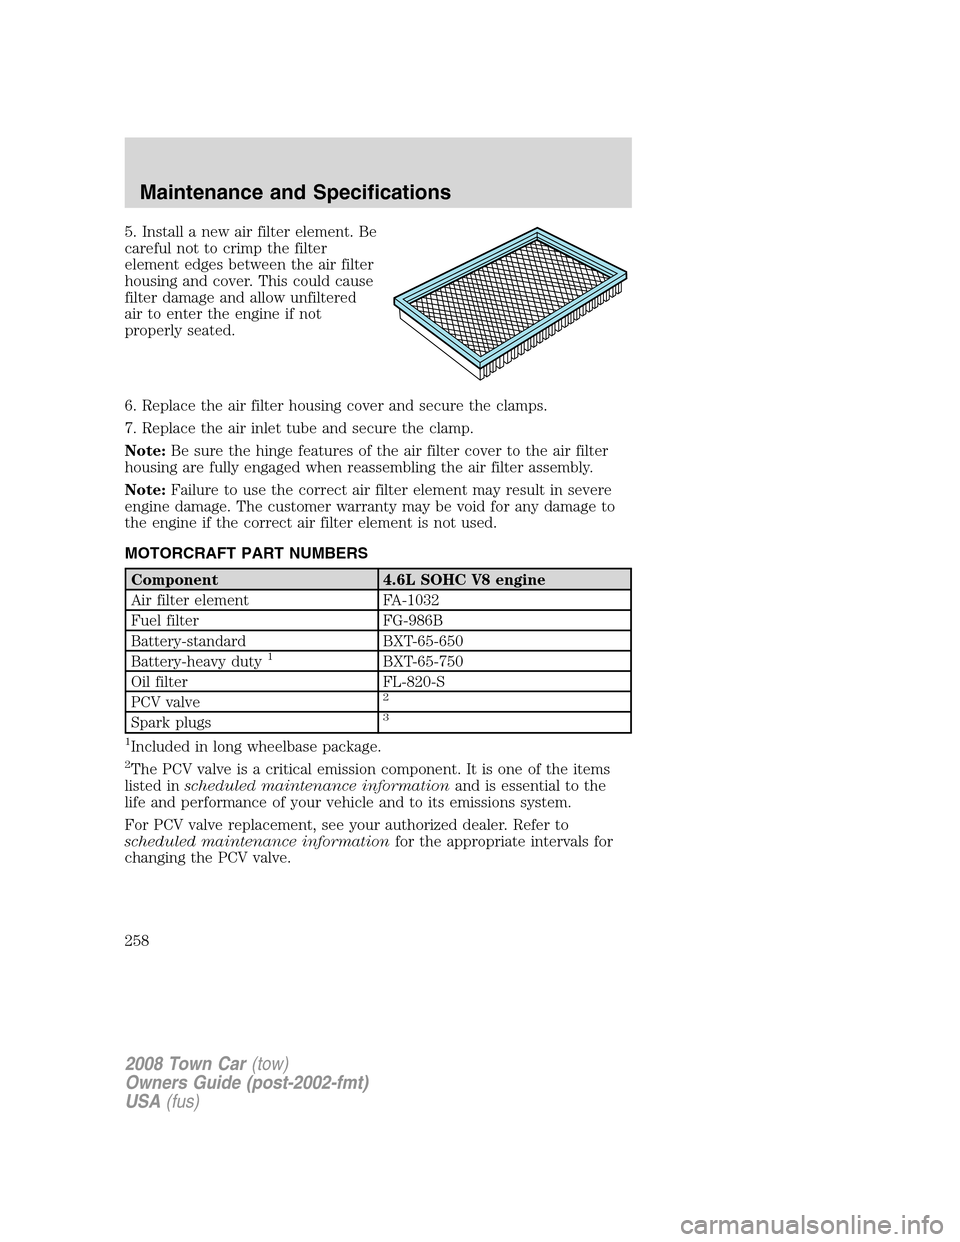 LINCOLN TOWN CAR 2008  Owners Manual 5. Install a new air filter element. Be
careful not to crimp the filter
element edges between the air filter
housing and cover. This could cause
filter damage and allow unfiltered
air to enter the eng